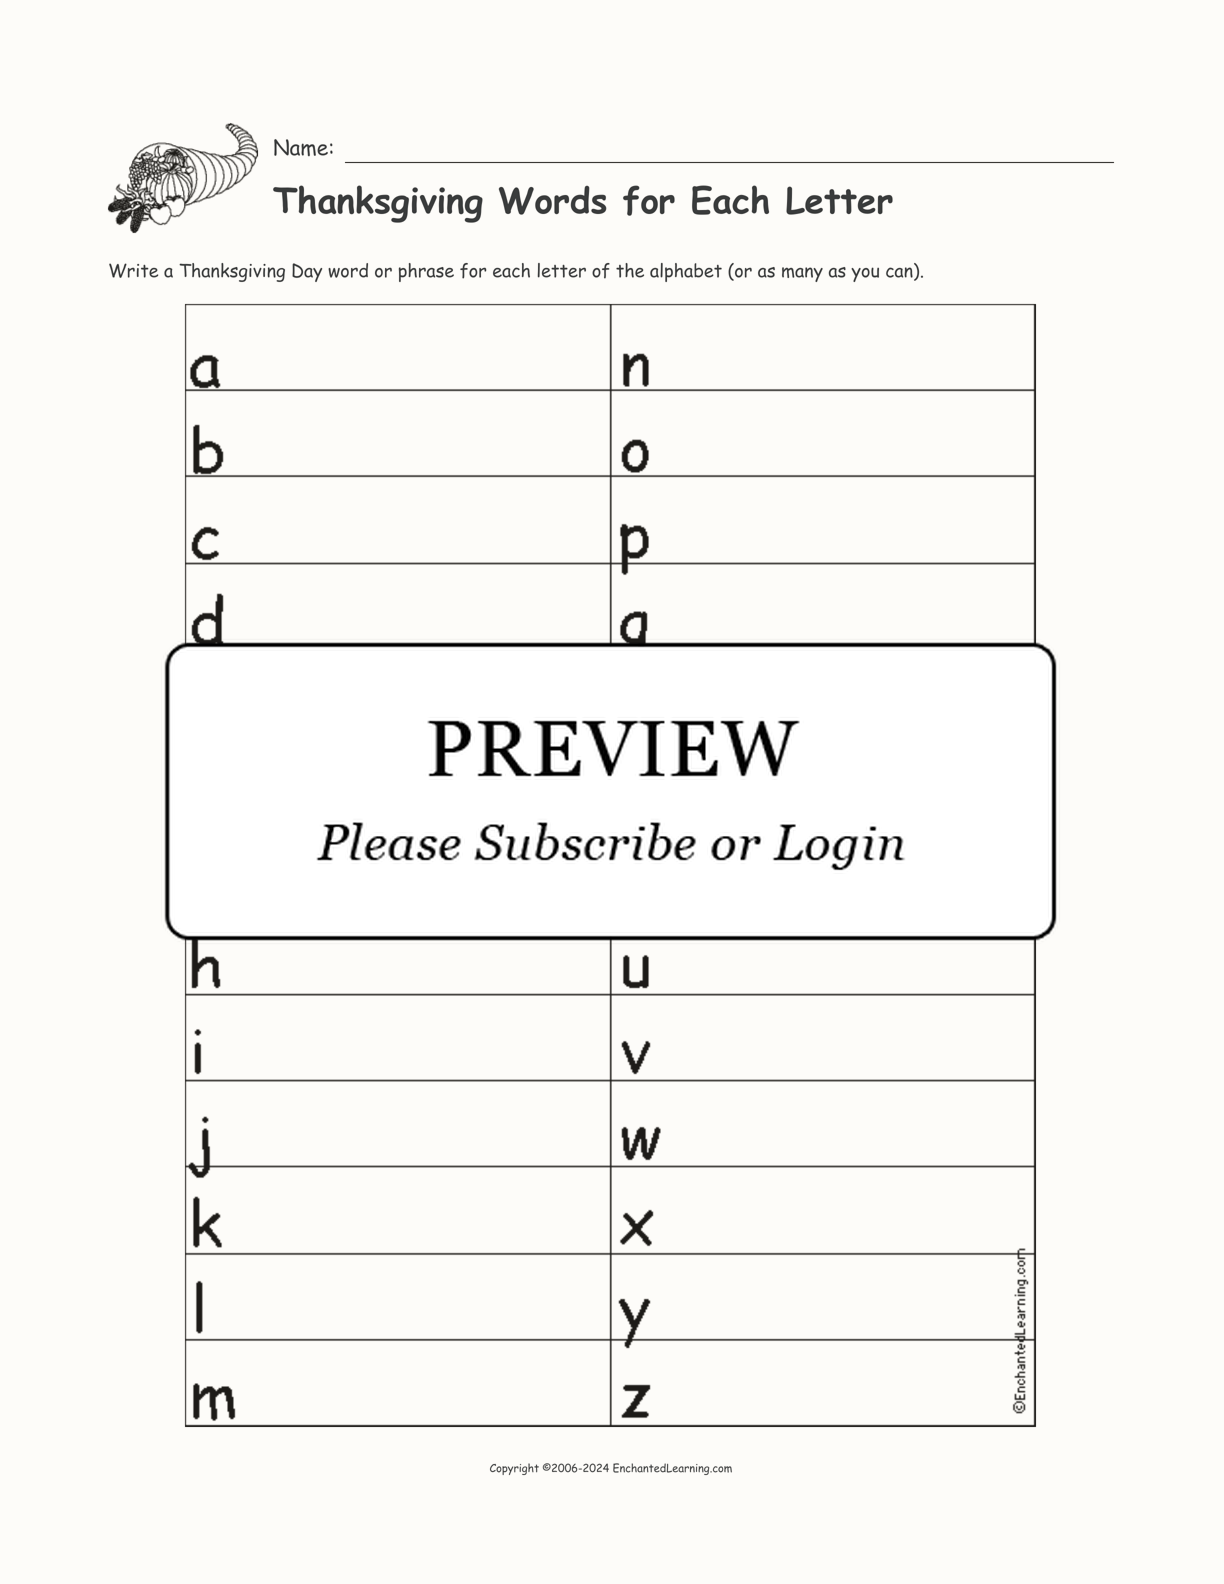 Thanksgiving Words for Each Letter interactive worksheet page 1